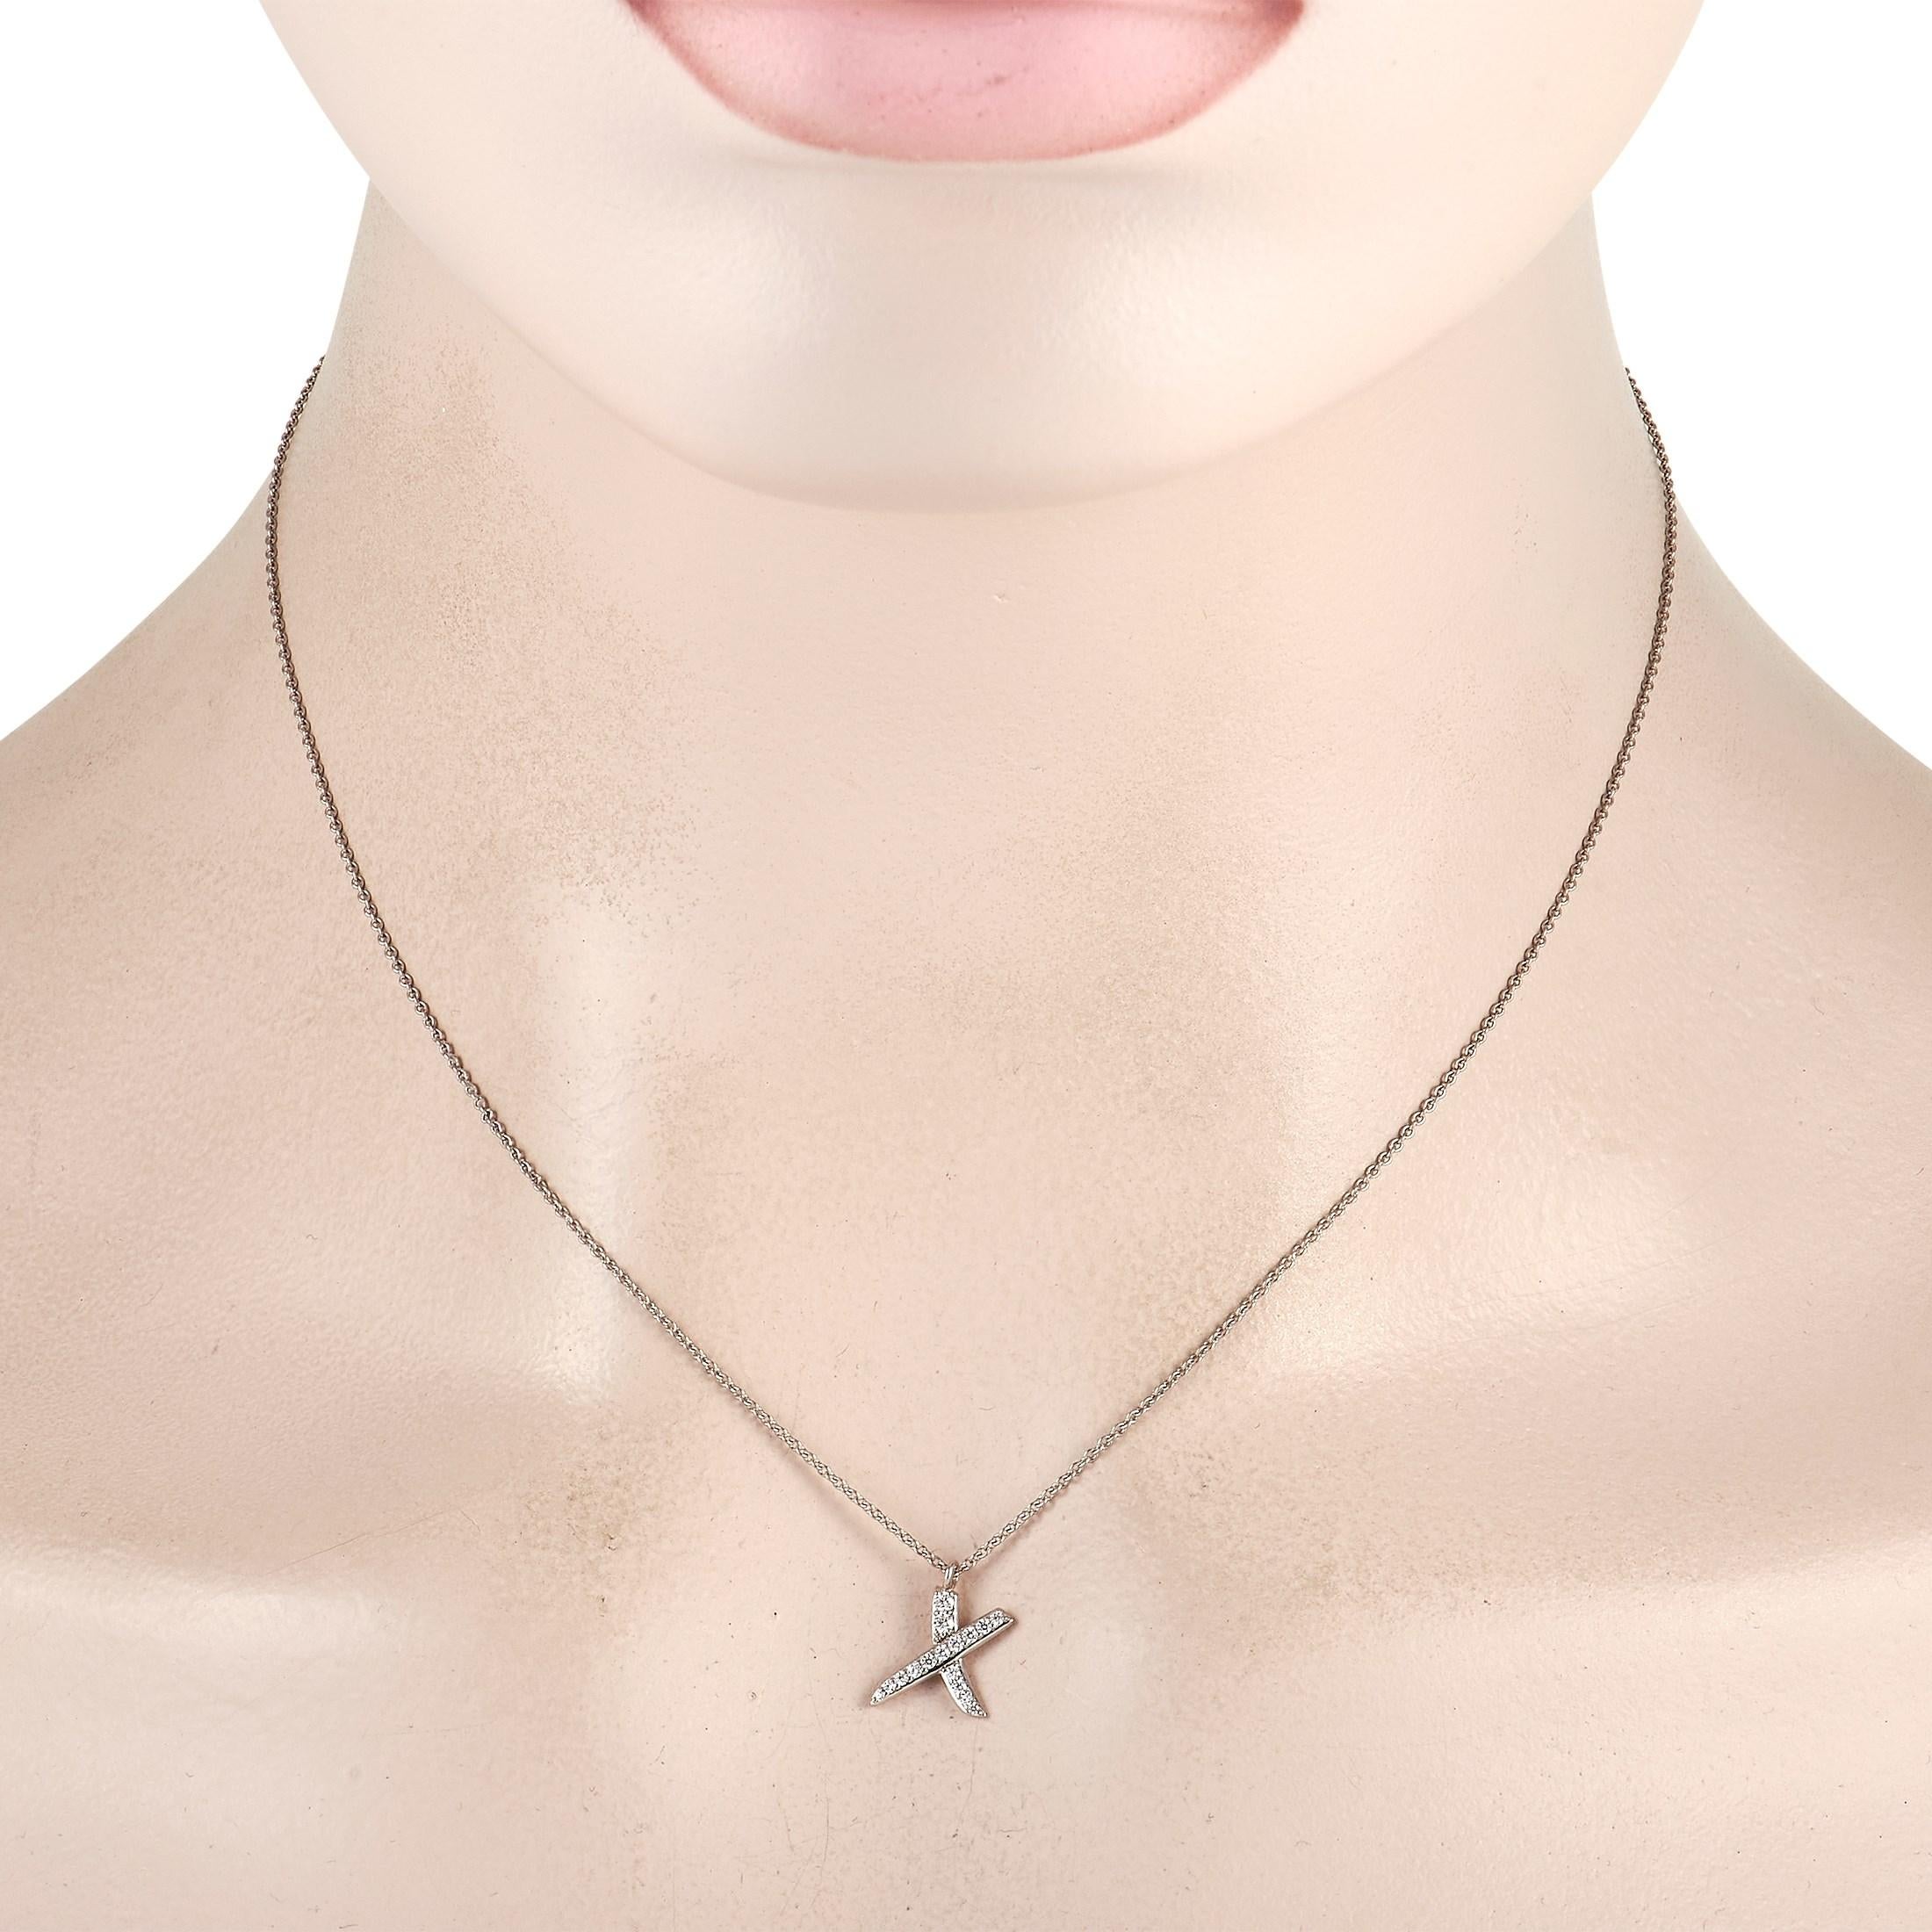 This Tiffany & Co. Paloma Picasso Platinum 0.20 ct Diamond Graffiti X Necklace shows beauty in an unexpected form. Designed by acclaimed jewelry designer Paloma Picasso for Tiffany & Co. is this x-shaped pendant adorned with 0.20 ct of pave-set